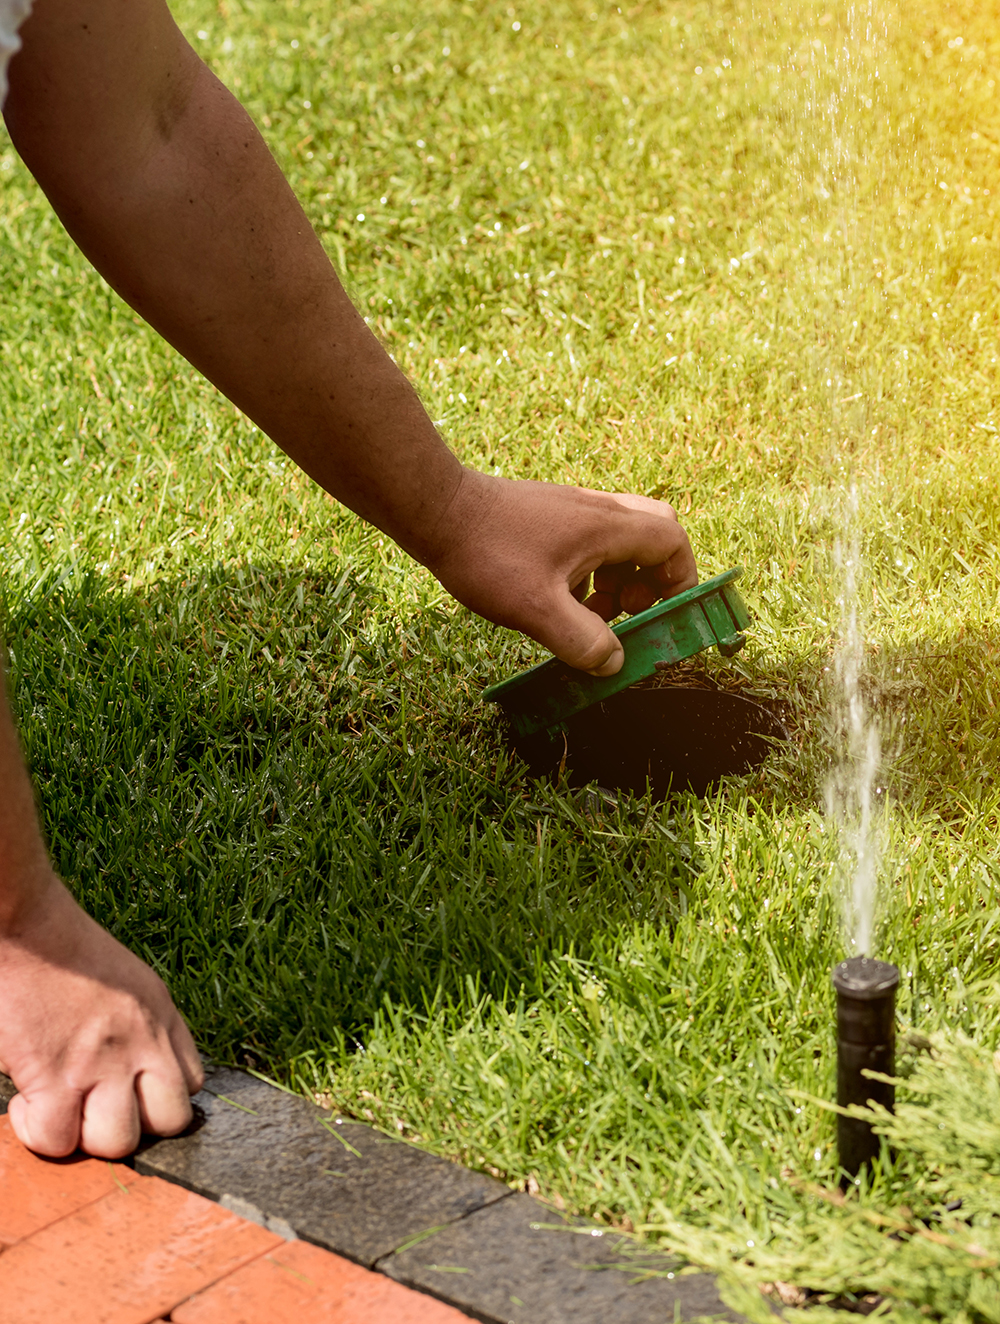 person hand checking soil with sprinkler running